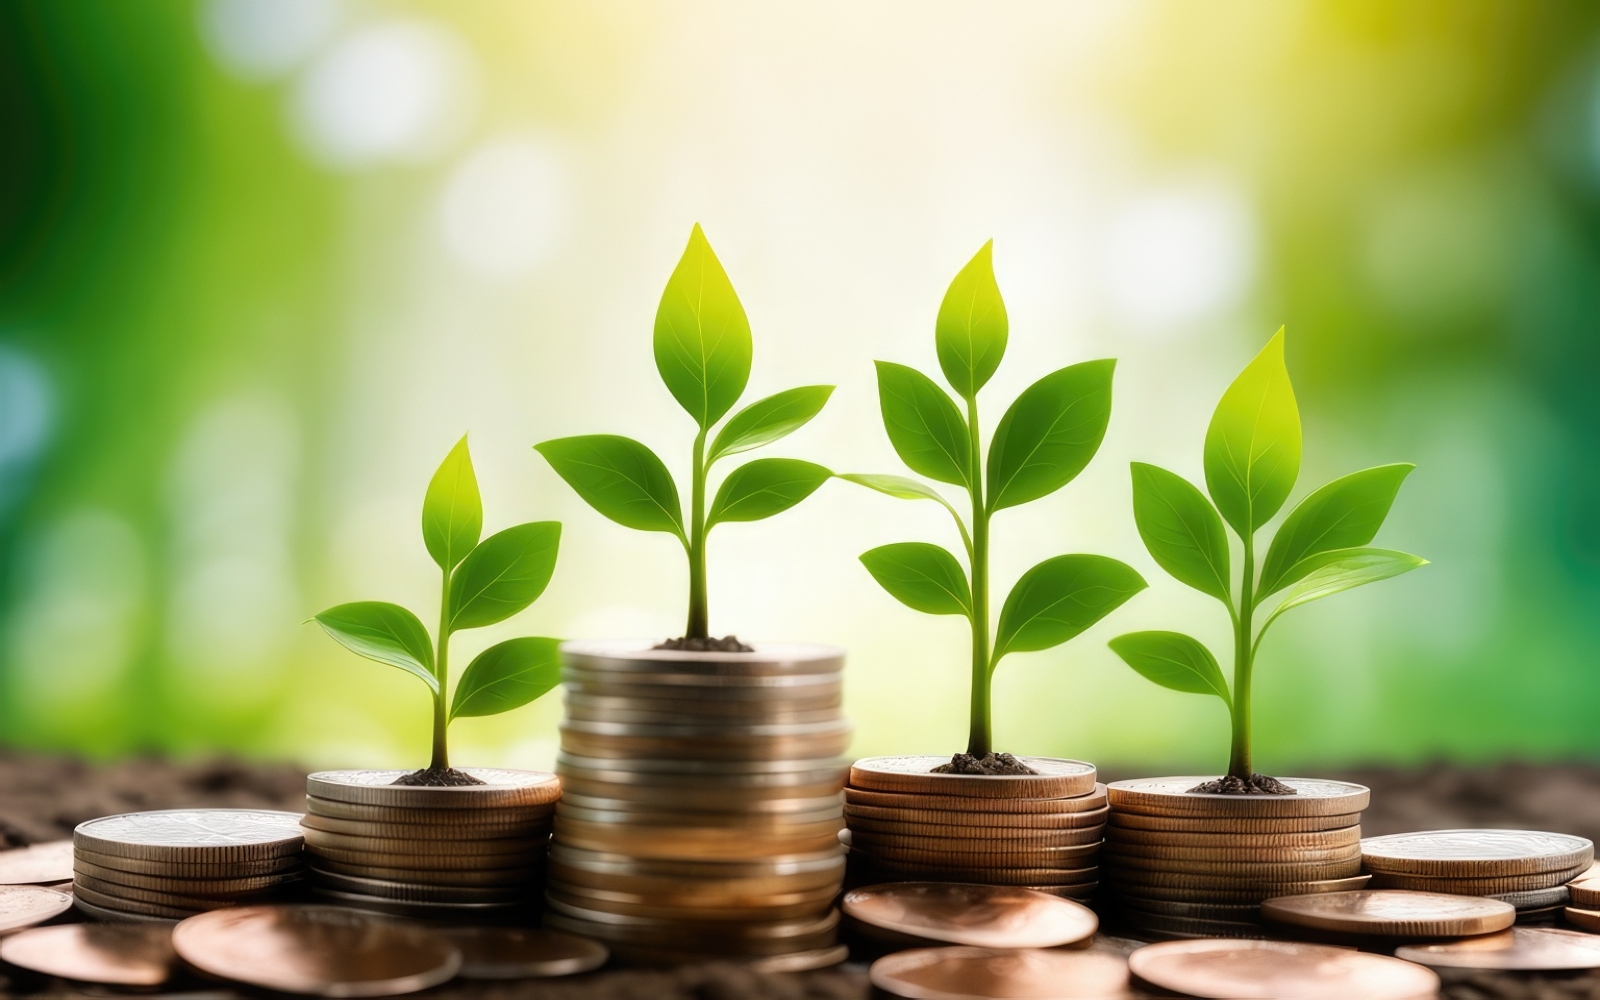 Premium Business Growing Plants on Coins Stacked on Green Blurred Background 23